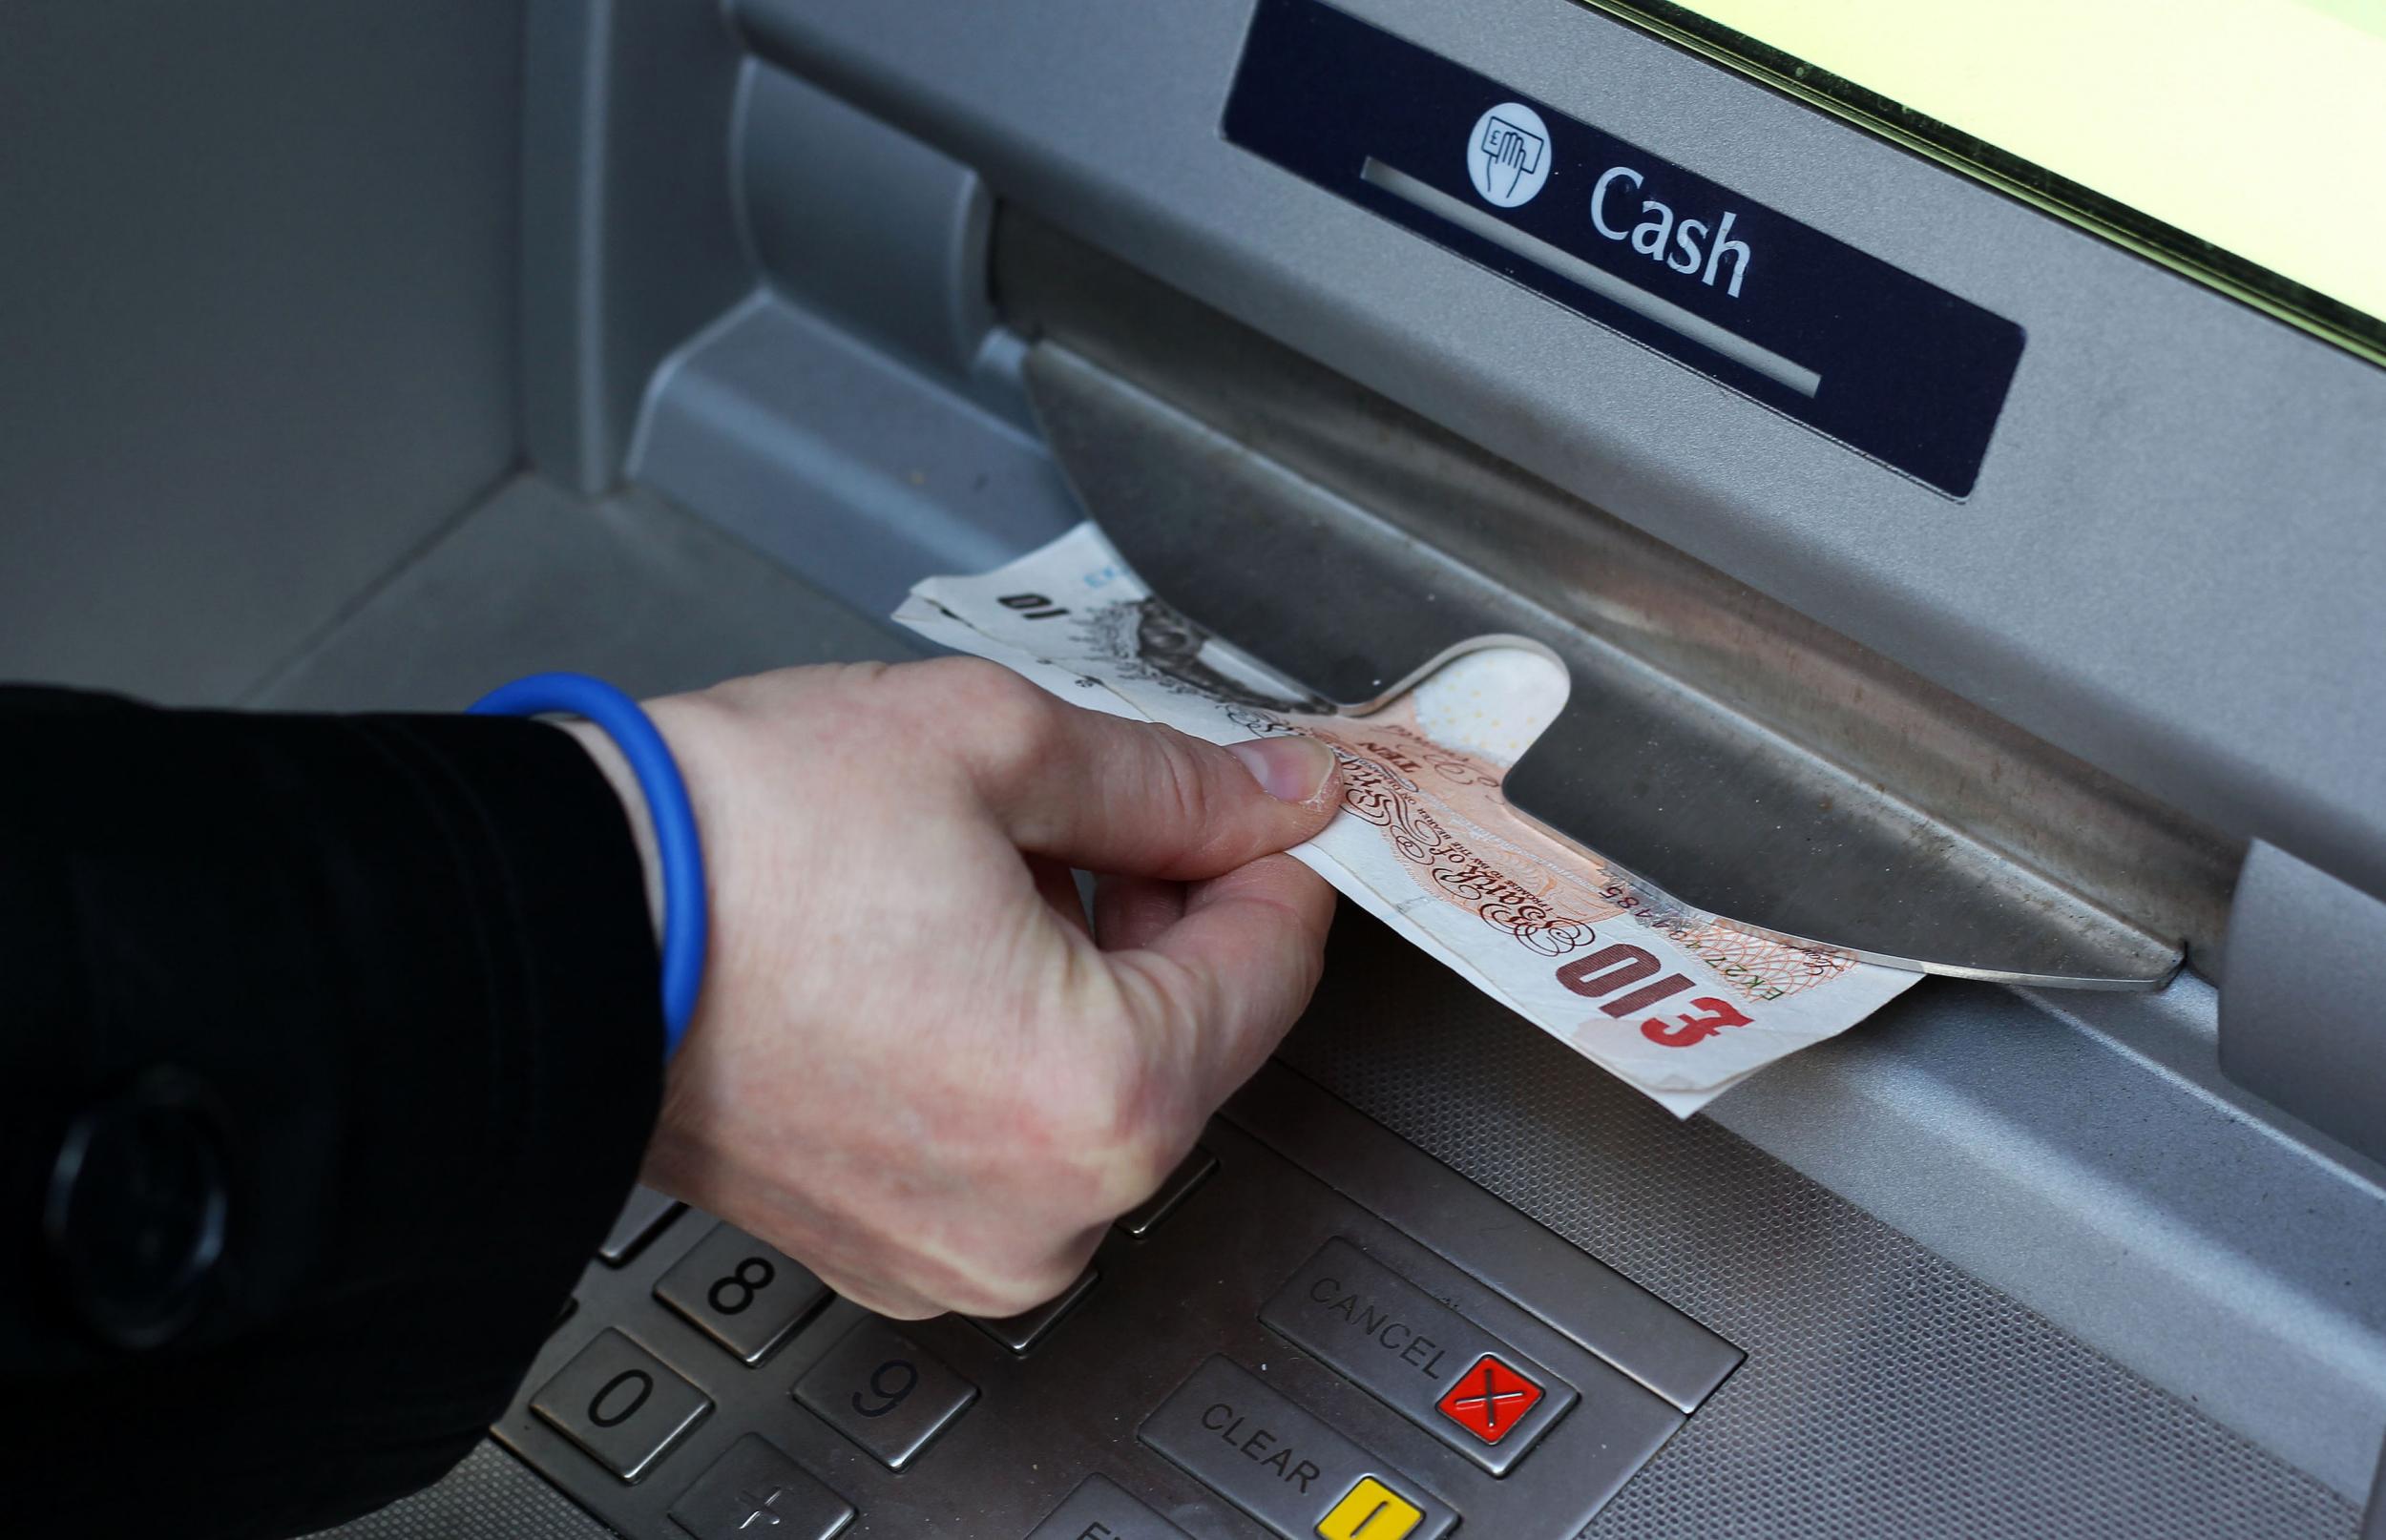 The number of cash machines like this one has increased, even though less people use cash